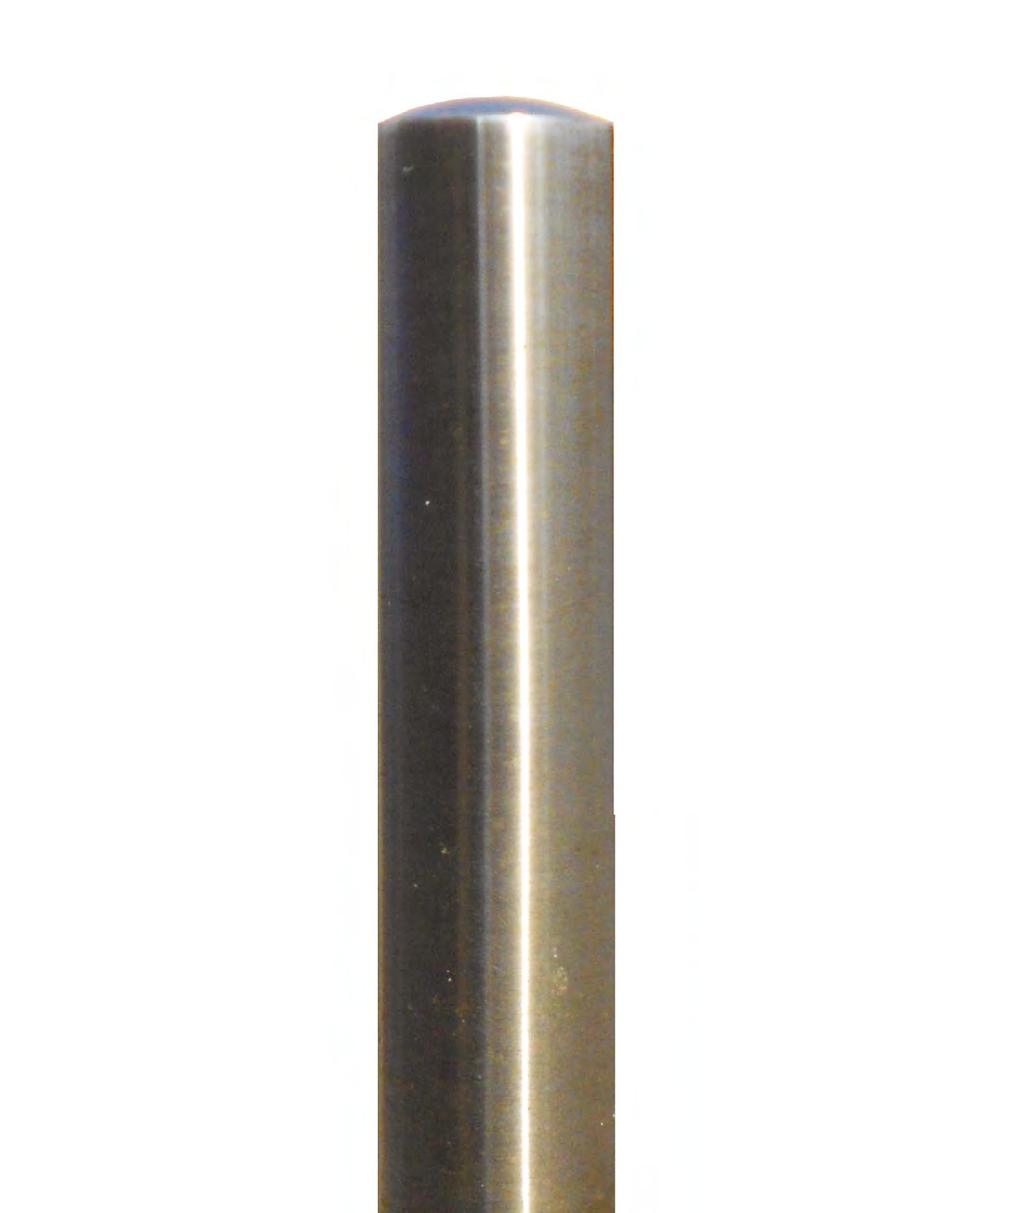 STAINLESS STEEL STATIC BOLLARDS Ideally suited for demarcation applications that have a contemporary style and are ideal for segregating